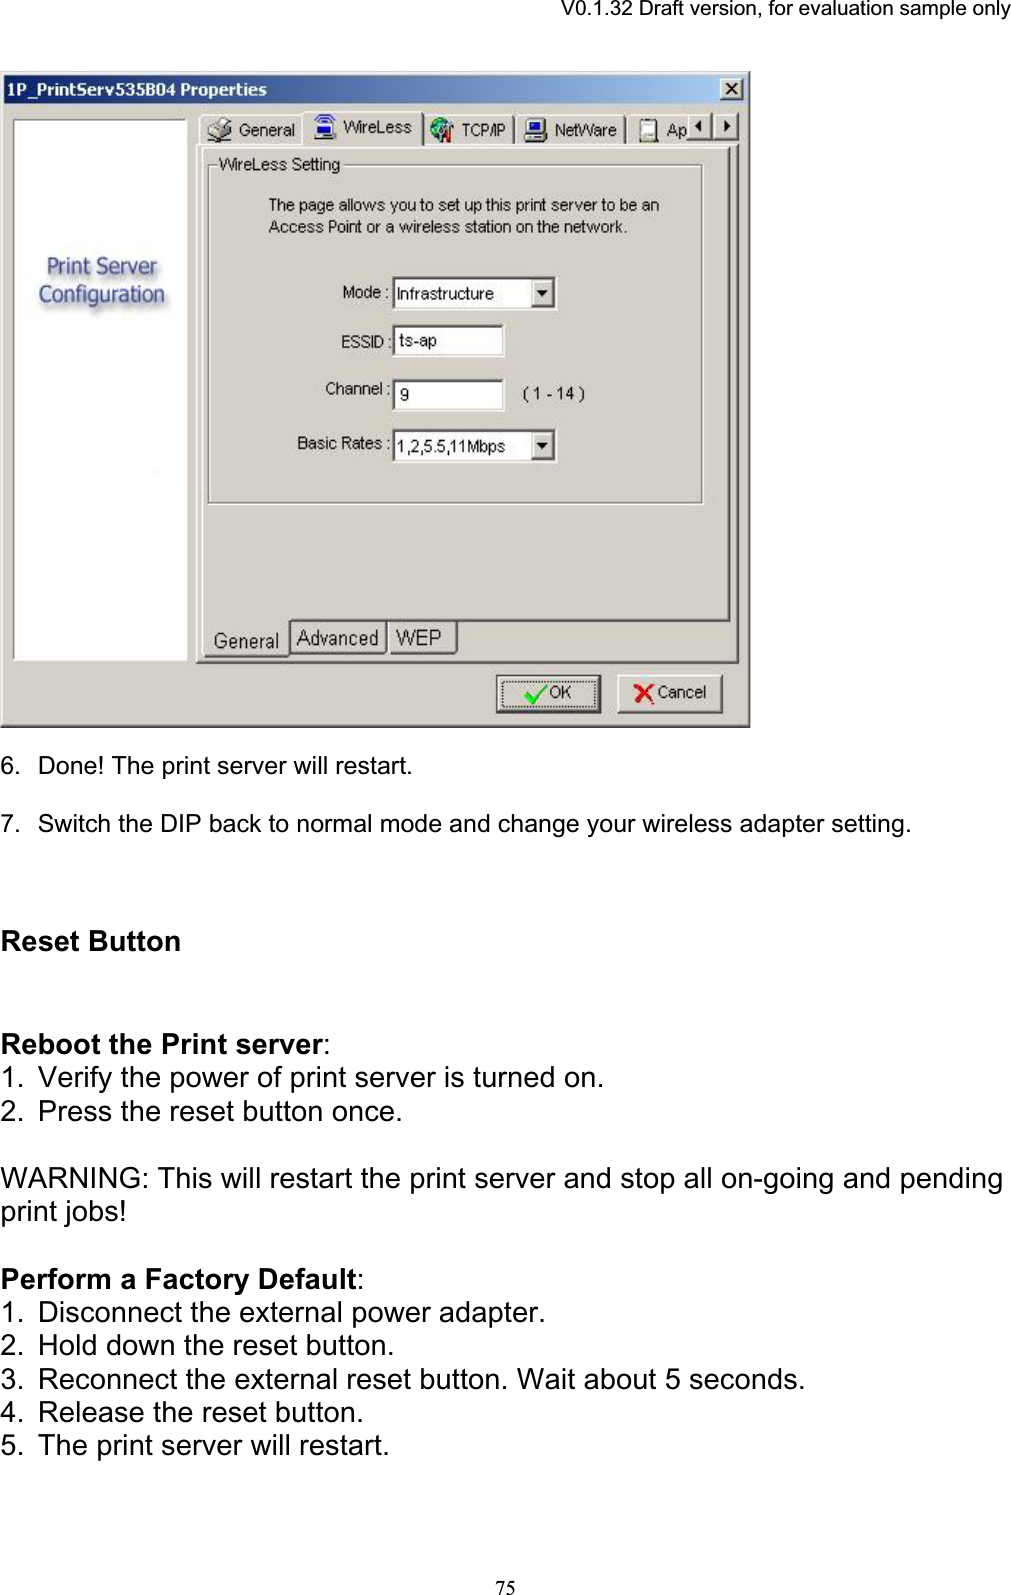 V0.1.32 Draft version, for evaluation sample only6. Done! The print server will restart.7. Switch the DIP back to normal mode and change your wireless adapter setting. Reset Button Reboot the Print server:1. Verify the power of print server is turned on. 2. Press the reset button once. WARNING: This will restart the print server and stop all on-going and pending print jobs! Perform a Factory Default:1. Disconnect the external power adapter. 2. Hold down the reset button. 3. Reconnect the external reset button. Wait about 5 seconds. 4. Release the reset button. 5. The print server will restart. 75